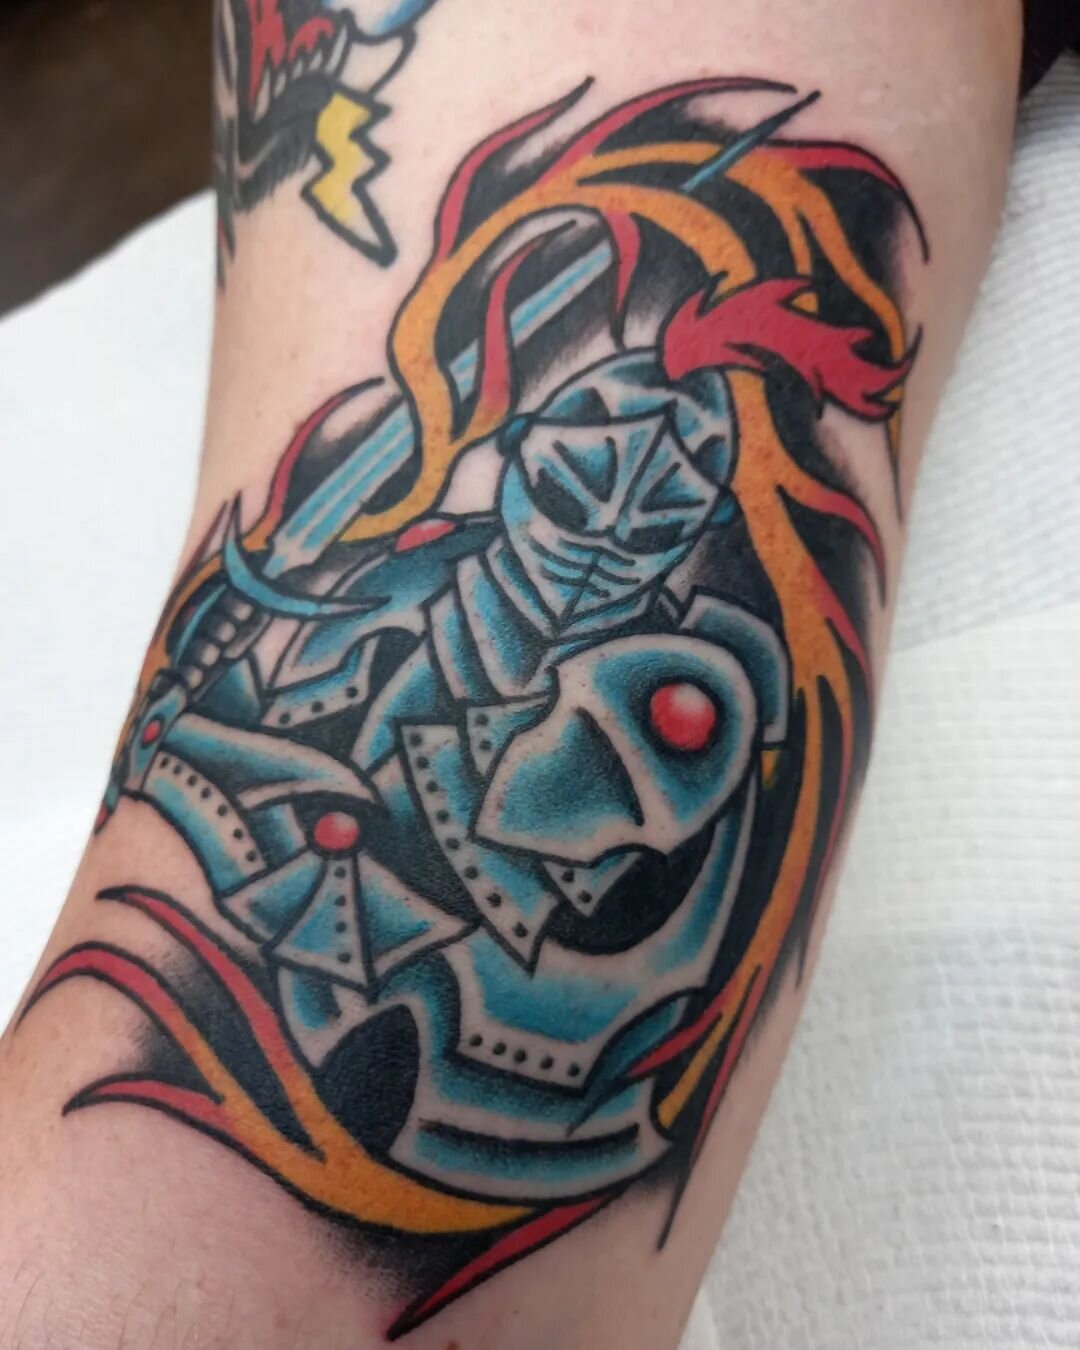 I love a good knight out. Thanks heaps Ryan for the fun tattoo session. Im always keen on doing custom pieces. Books always open. Send me a DM or contact @mans_ruin_tattoo. 🤘🤘🤘